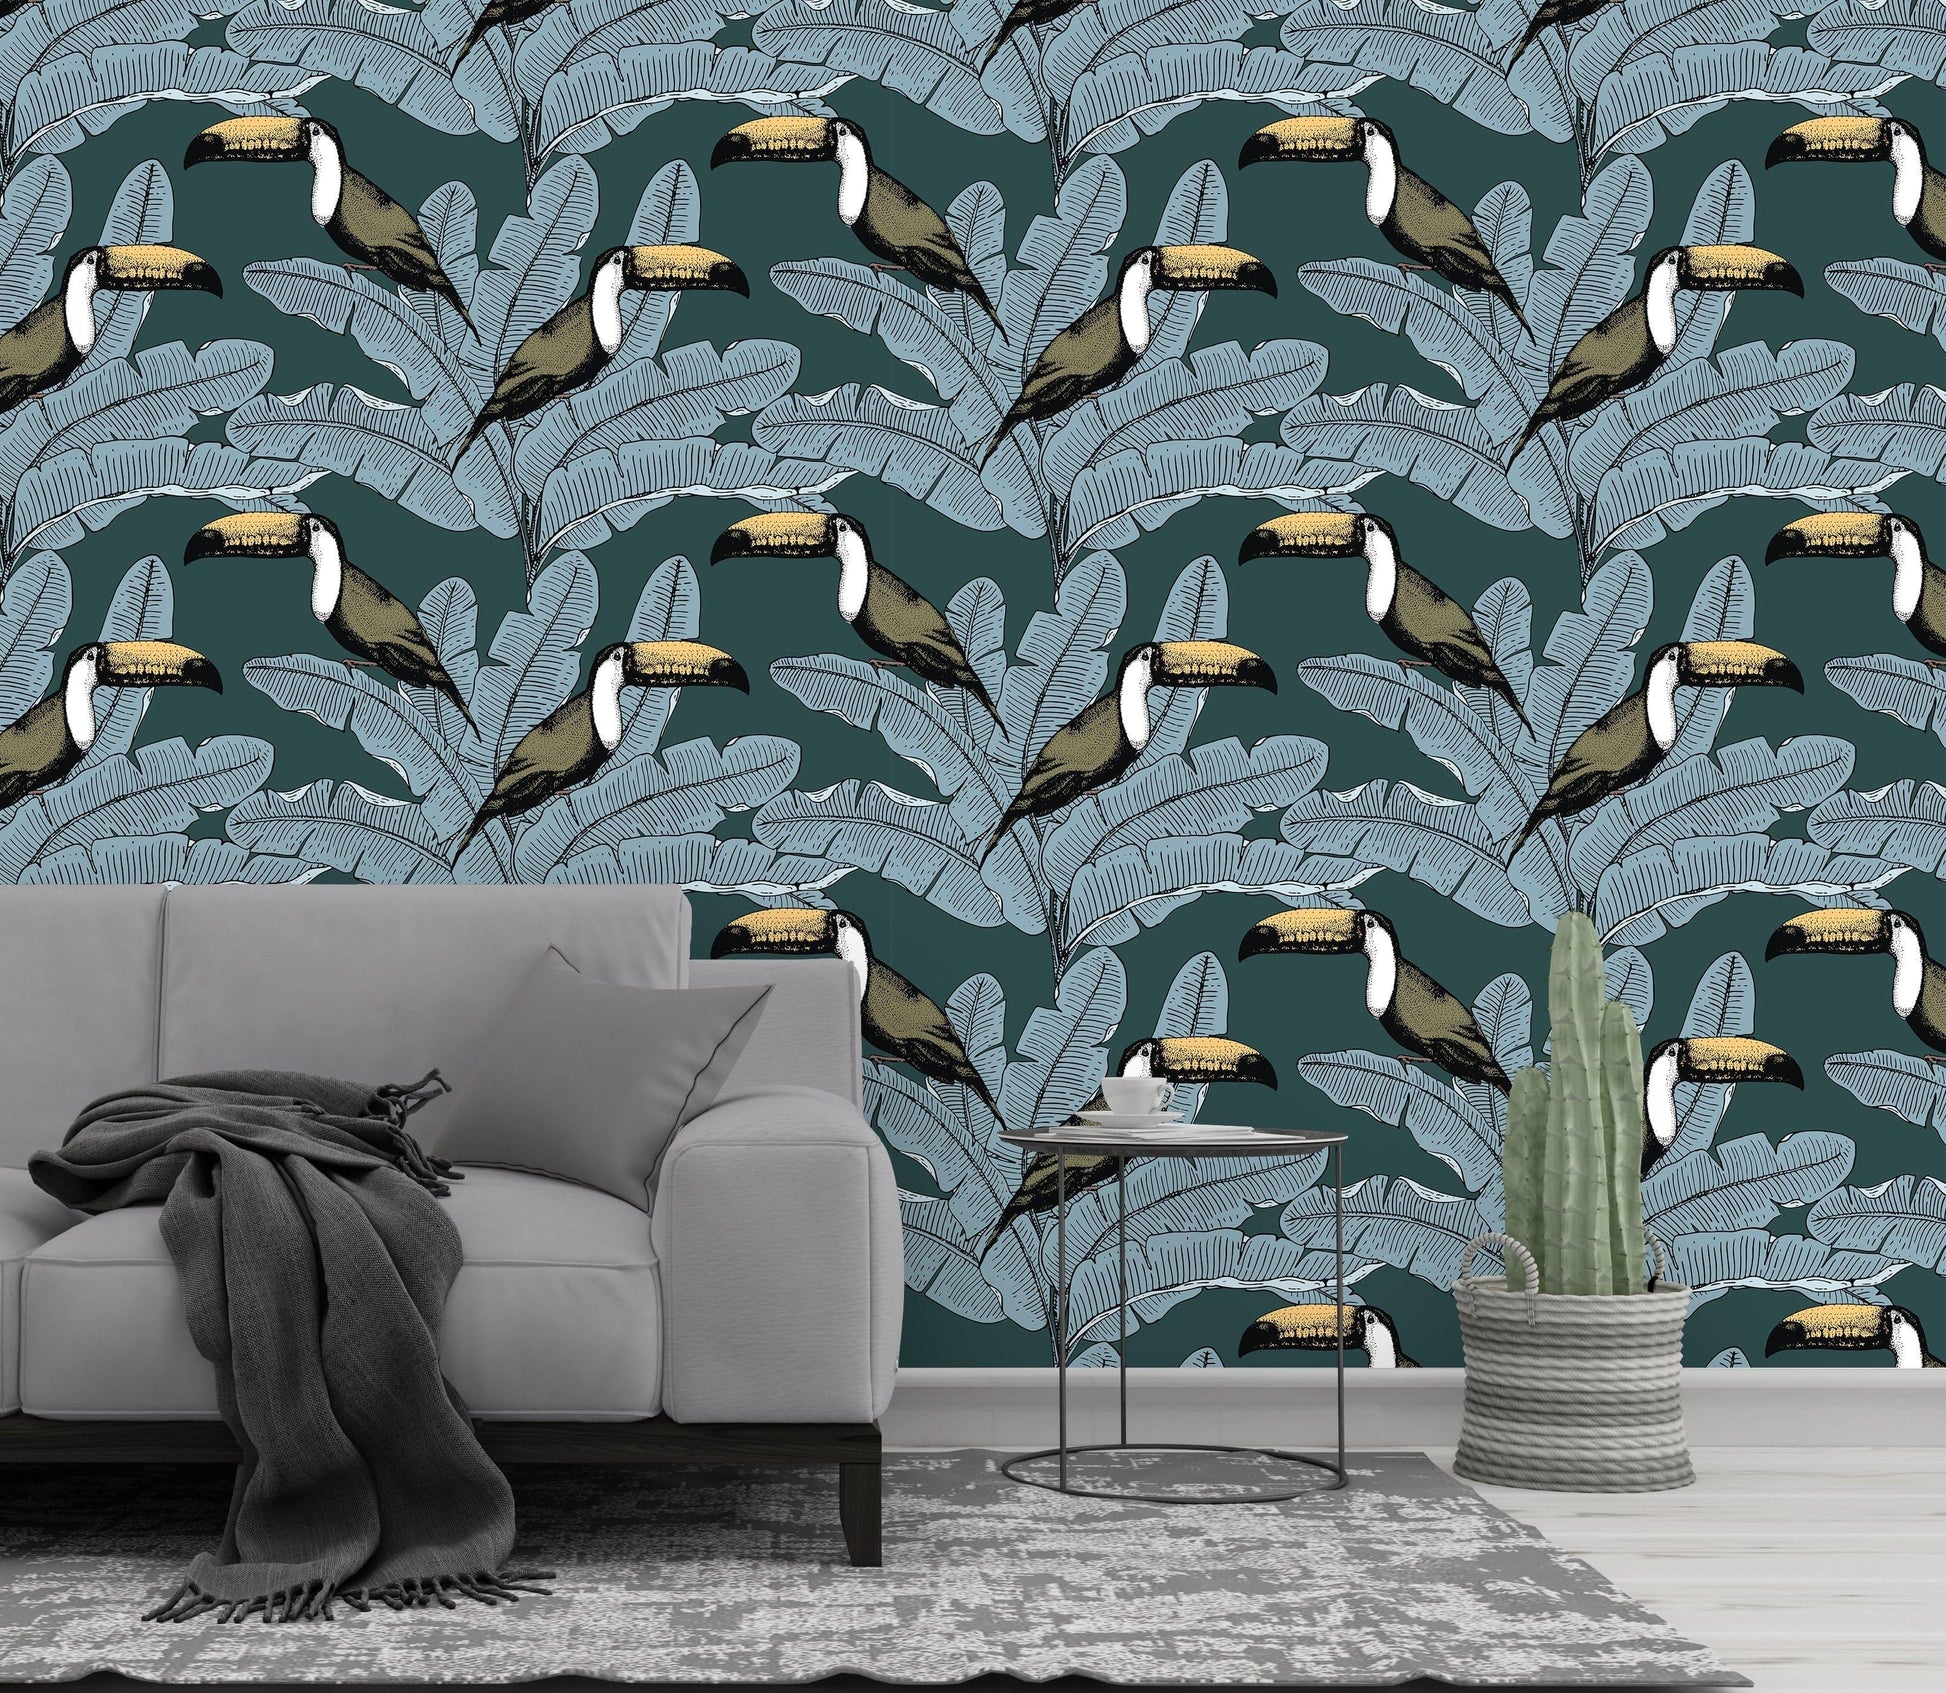 Tropical Toucan Palm Leaves Removable Wallpaper Tropical Toucan Palm Leaves Removable Wallpaper 